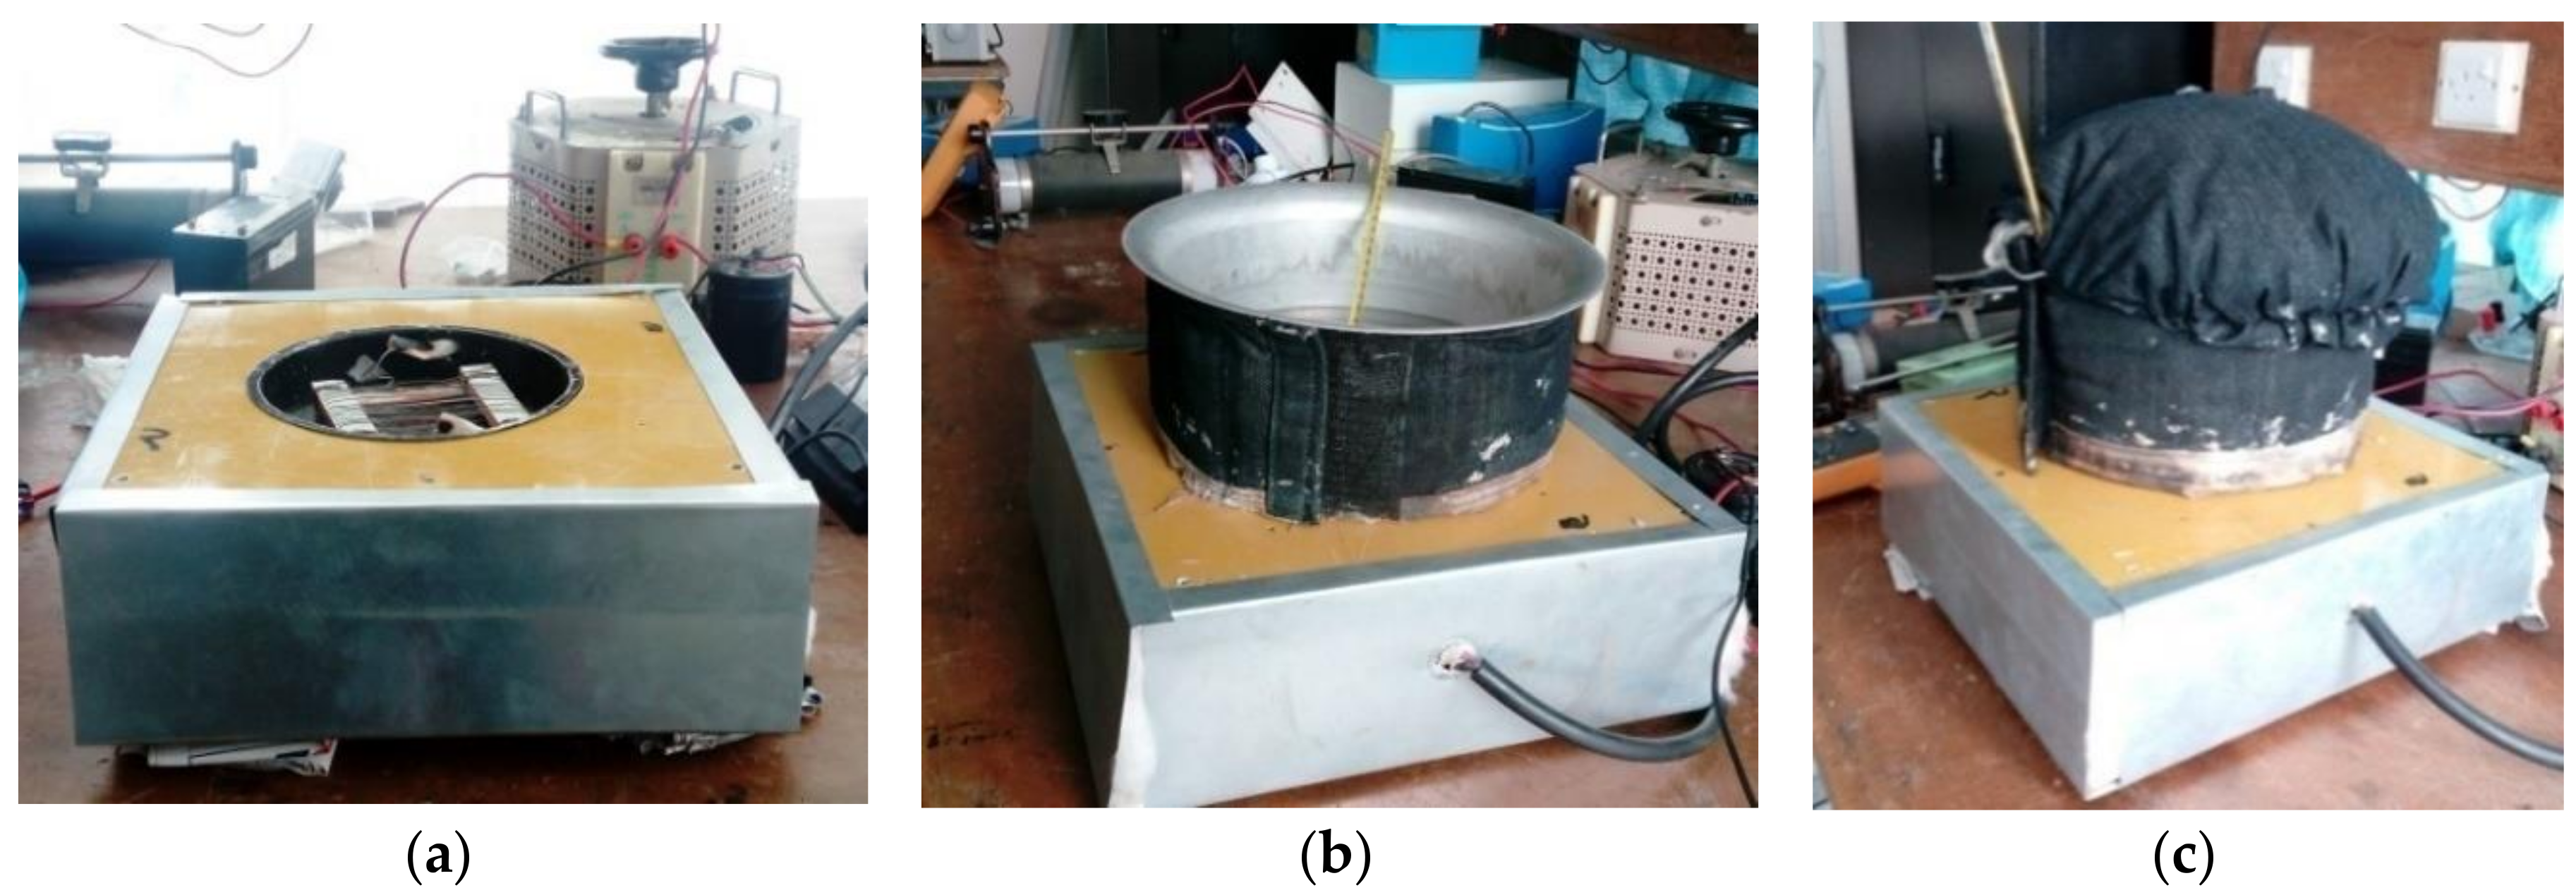 Sustainability assessment of home-made solar cookers for use in